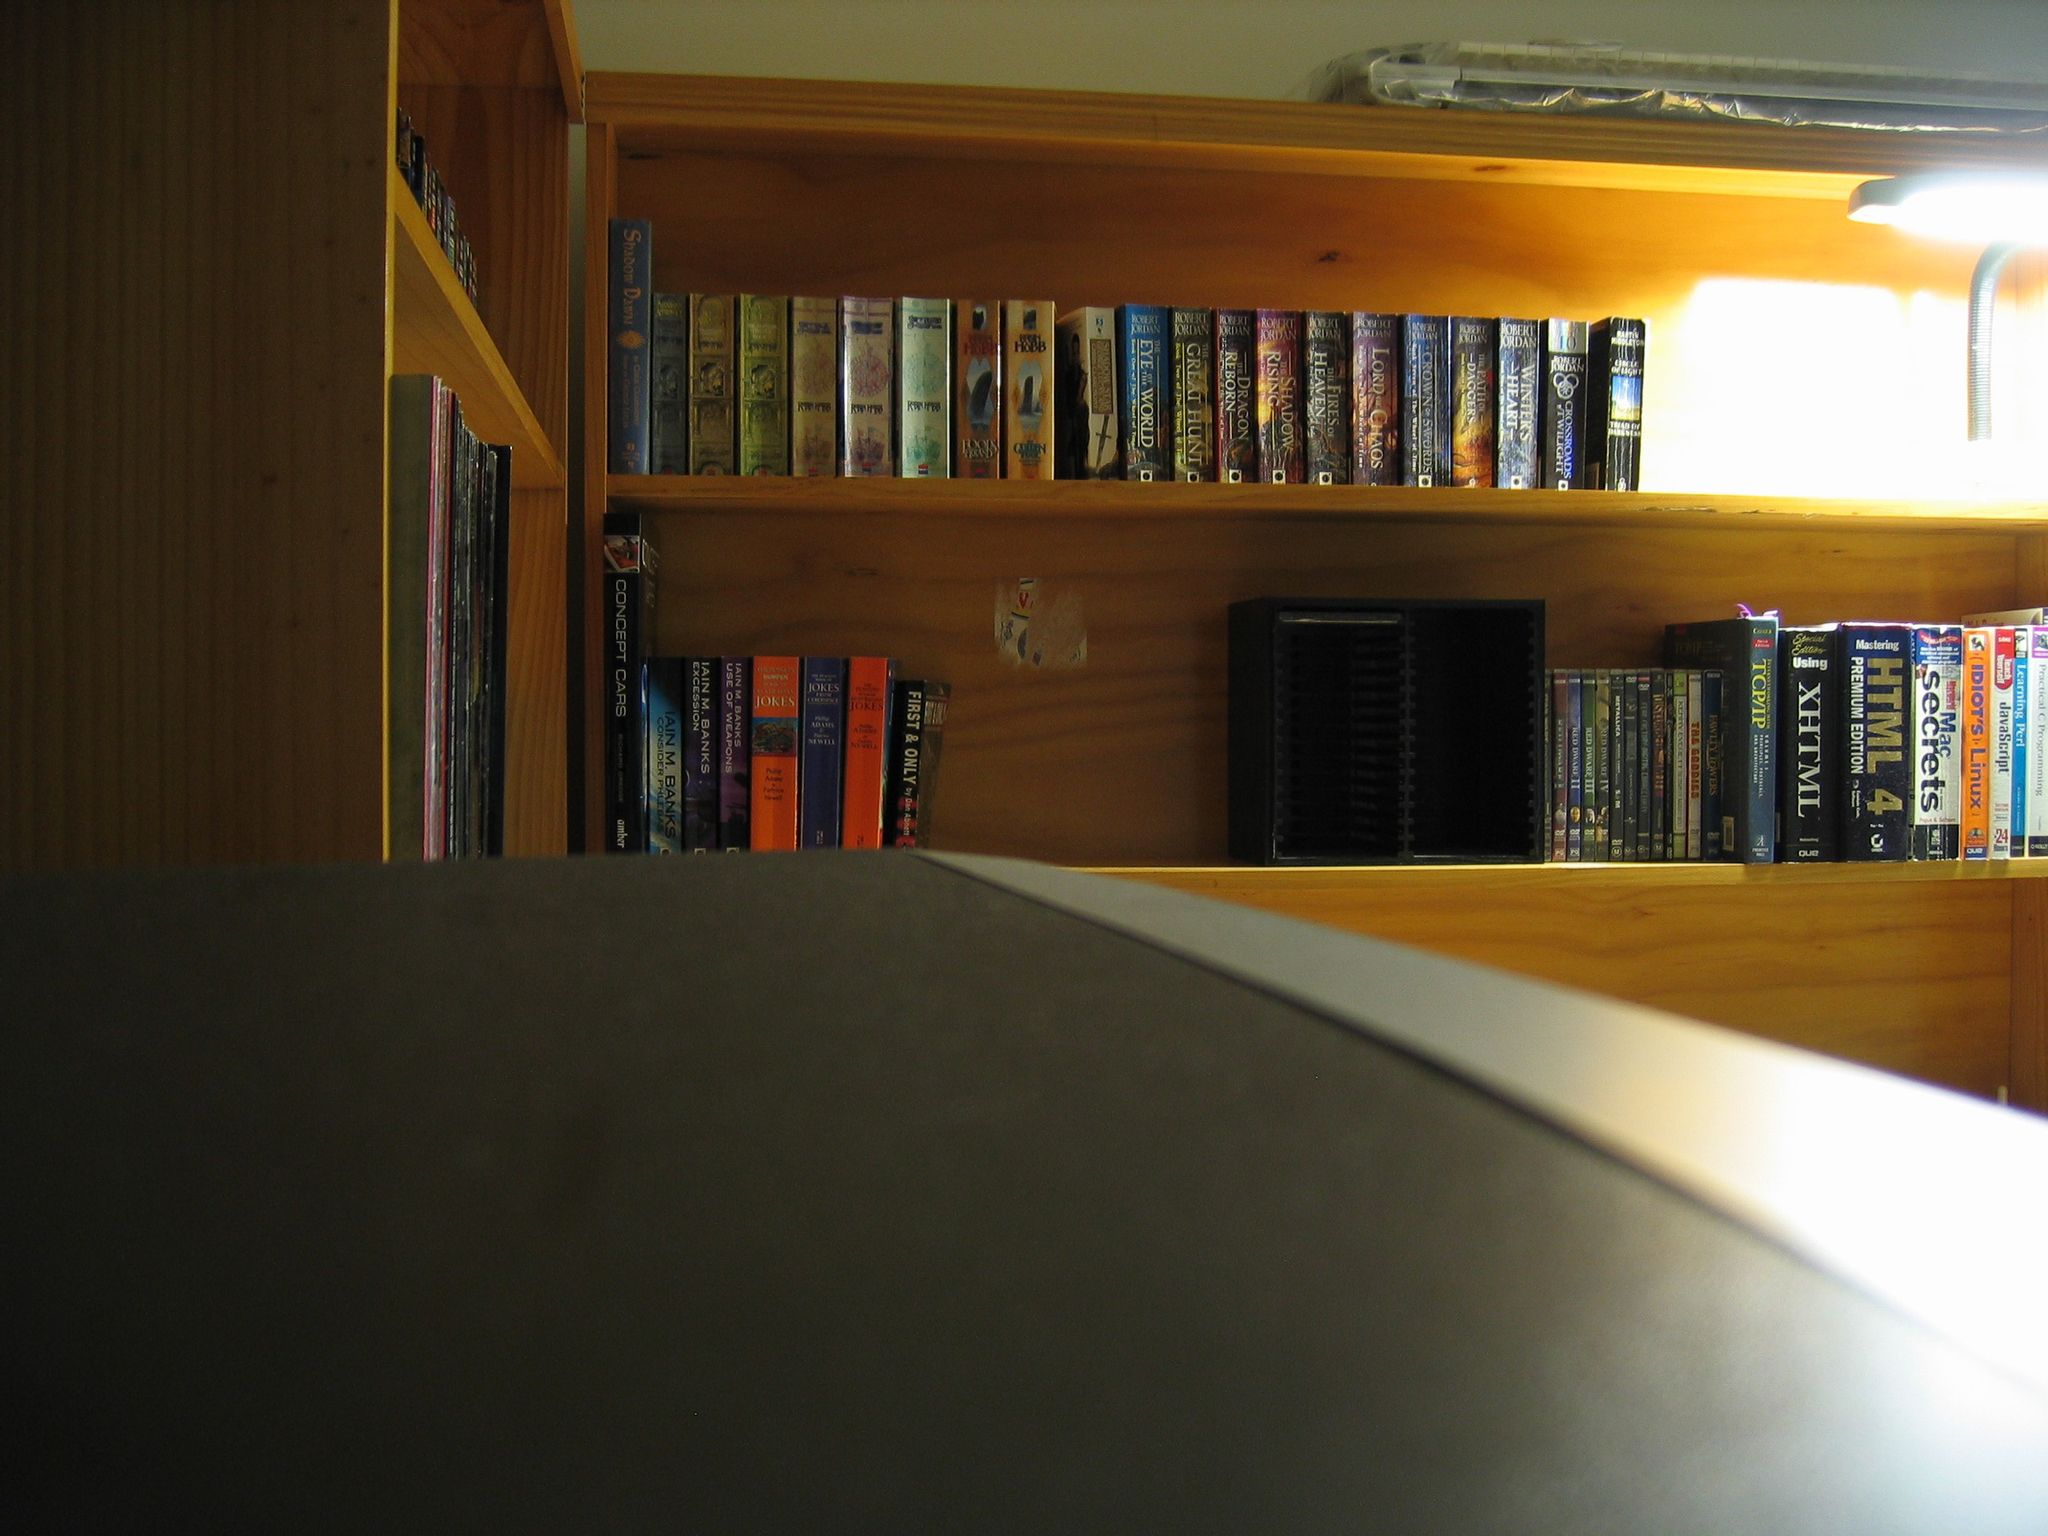 A photo of a bookshelf, taken with the camera sitting on top of a CRT TV, and the TV is taking up the bottom third of the photo.